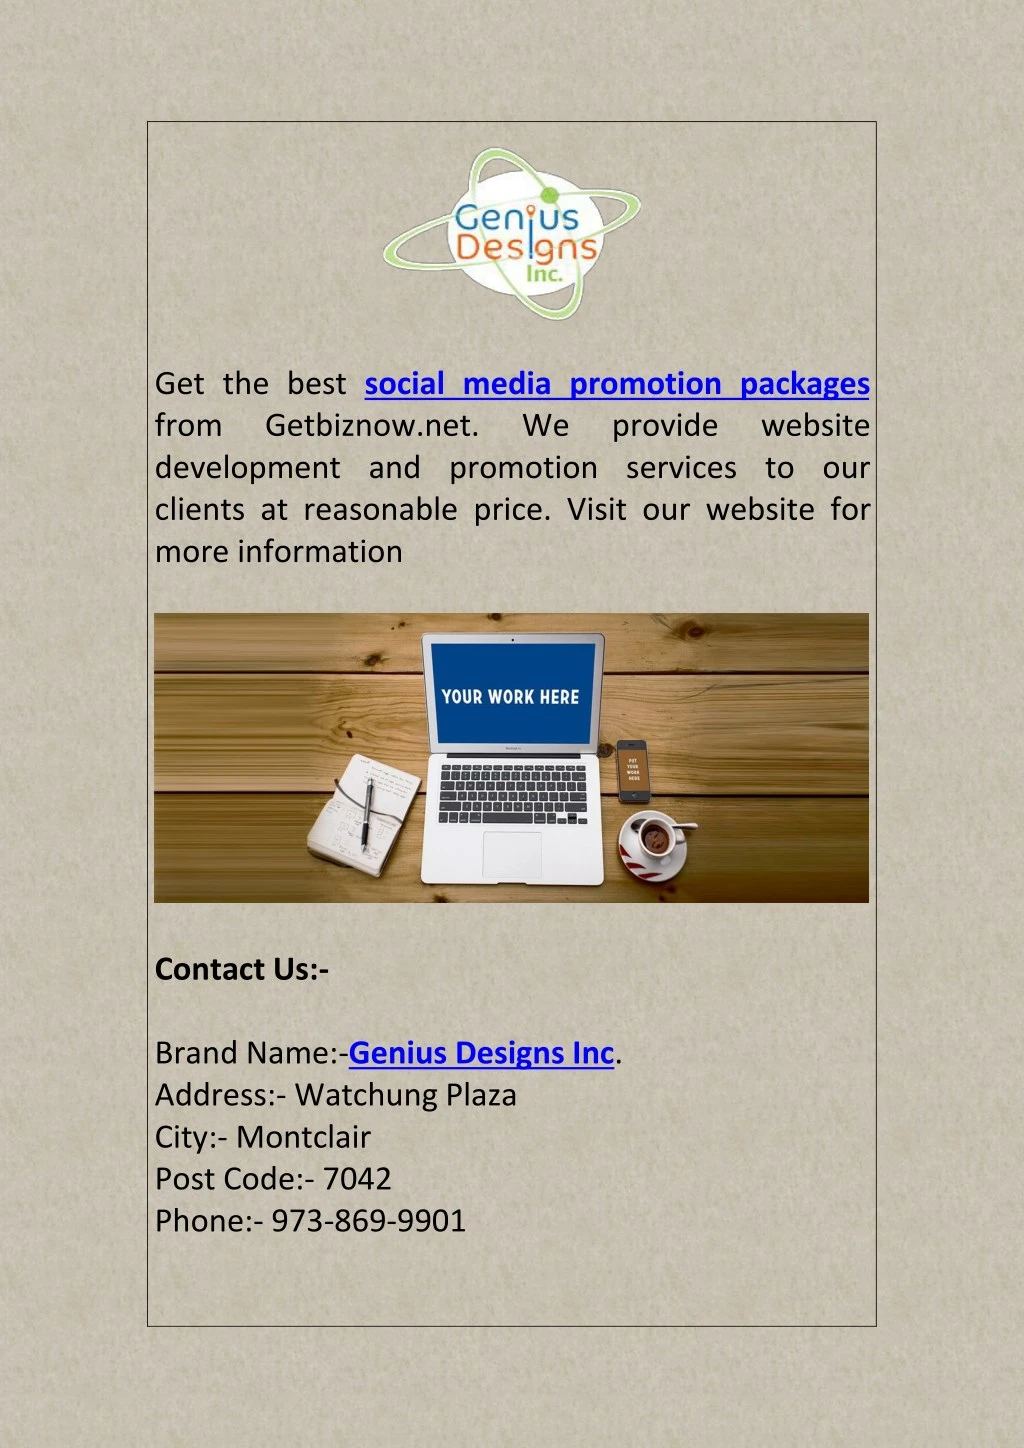 get the best social media promotion packages from